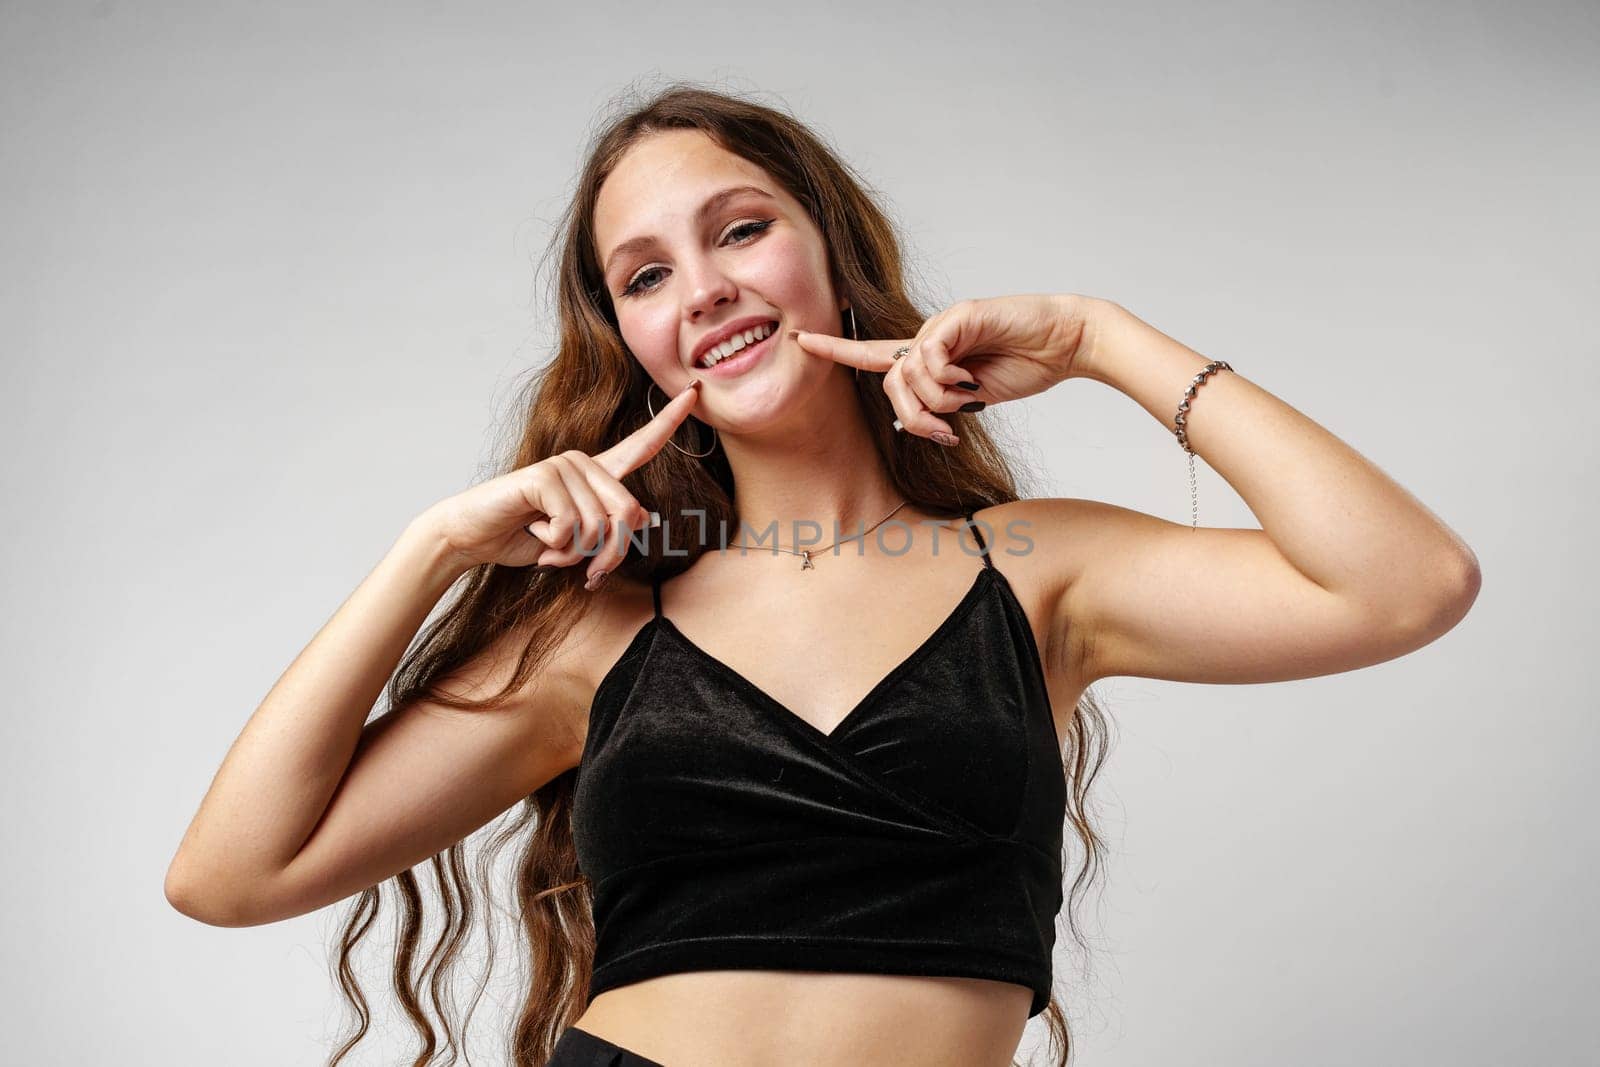 A cheerful young woman with brown hair wearing a black dress is playfully posing against a neutral grey backdrop. She is pointing at her smile, showcasing her happiness, and expressing a positive emotion with sparkling eyes and a beaming expression.